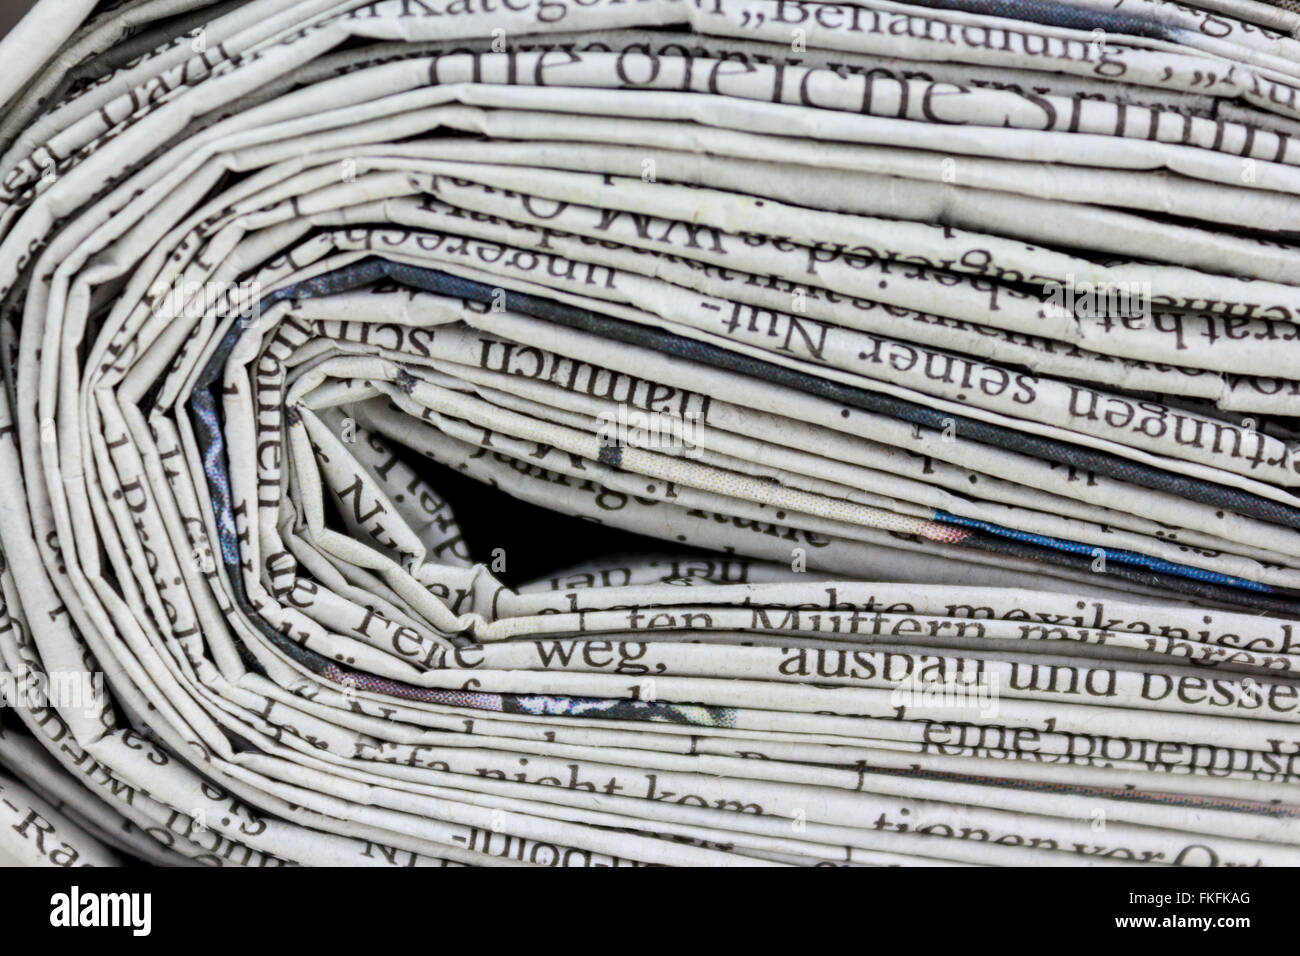 stacked old newspapers pile of newspapers Stock Photo